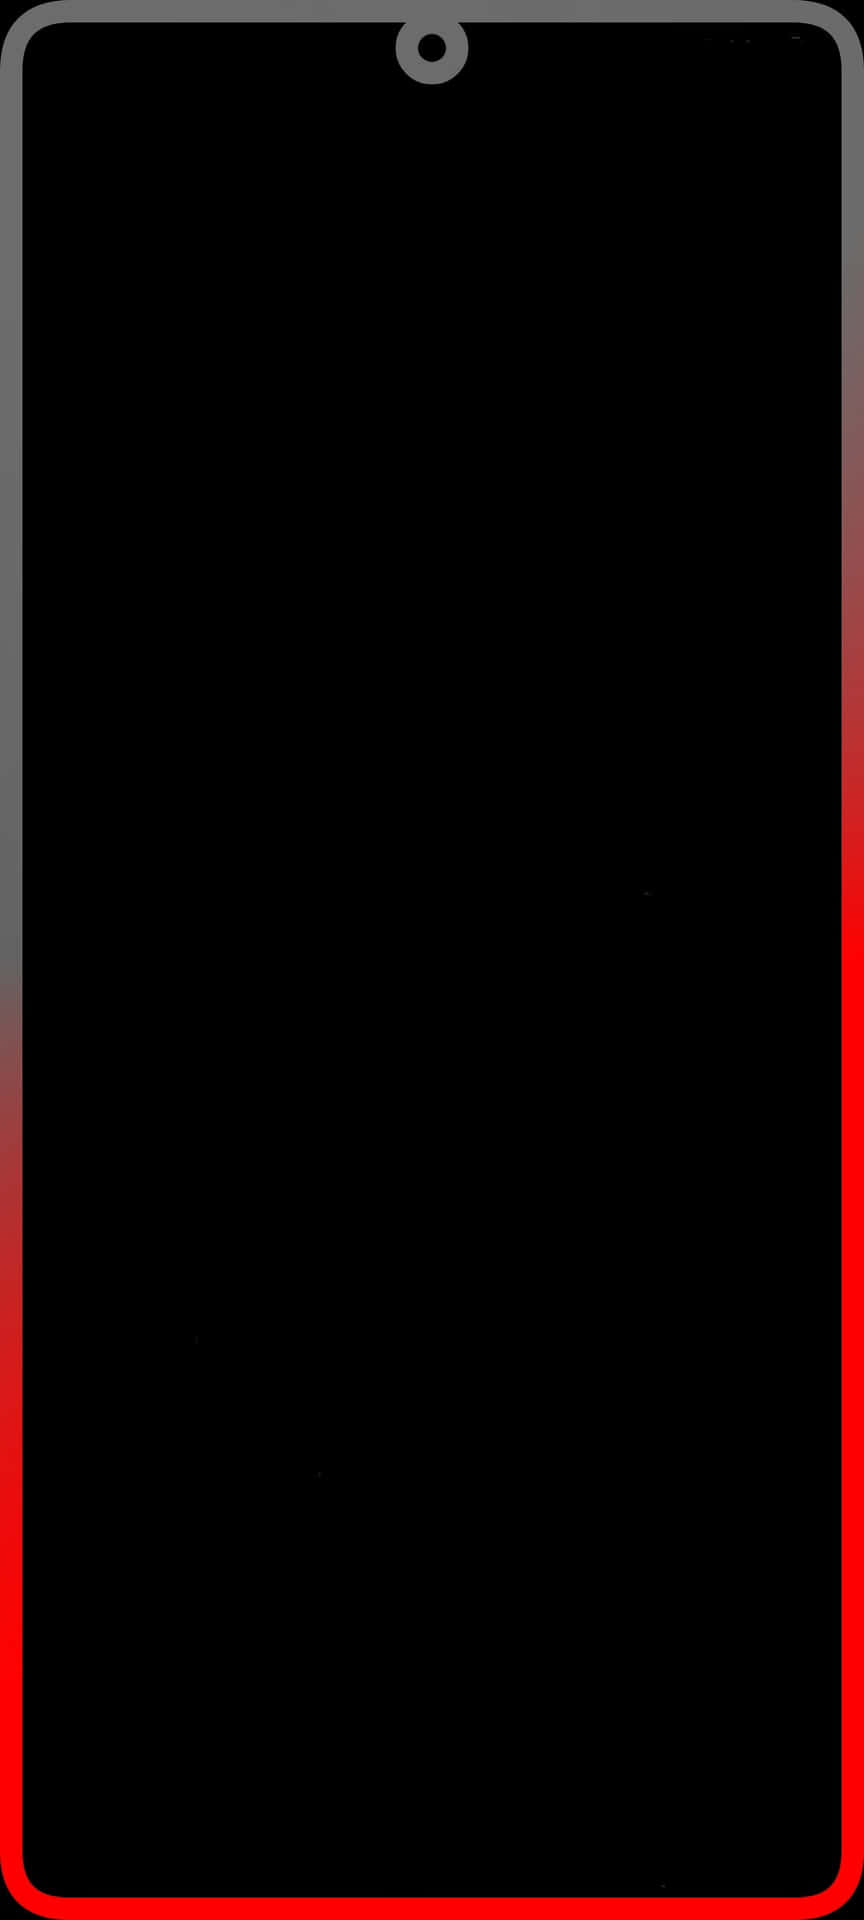 A Black And Red Square Frame With A Red Border Background